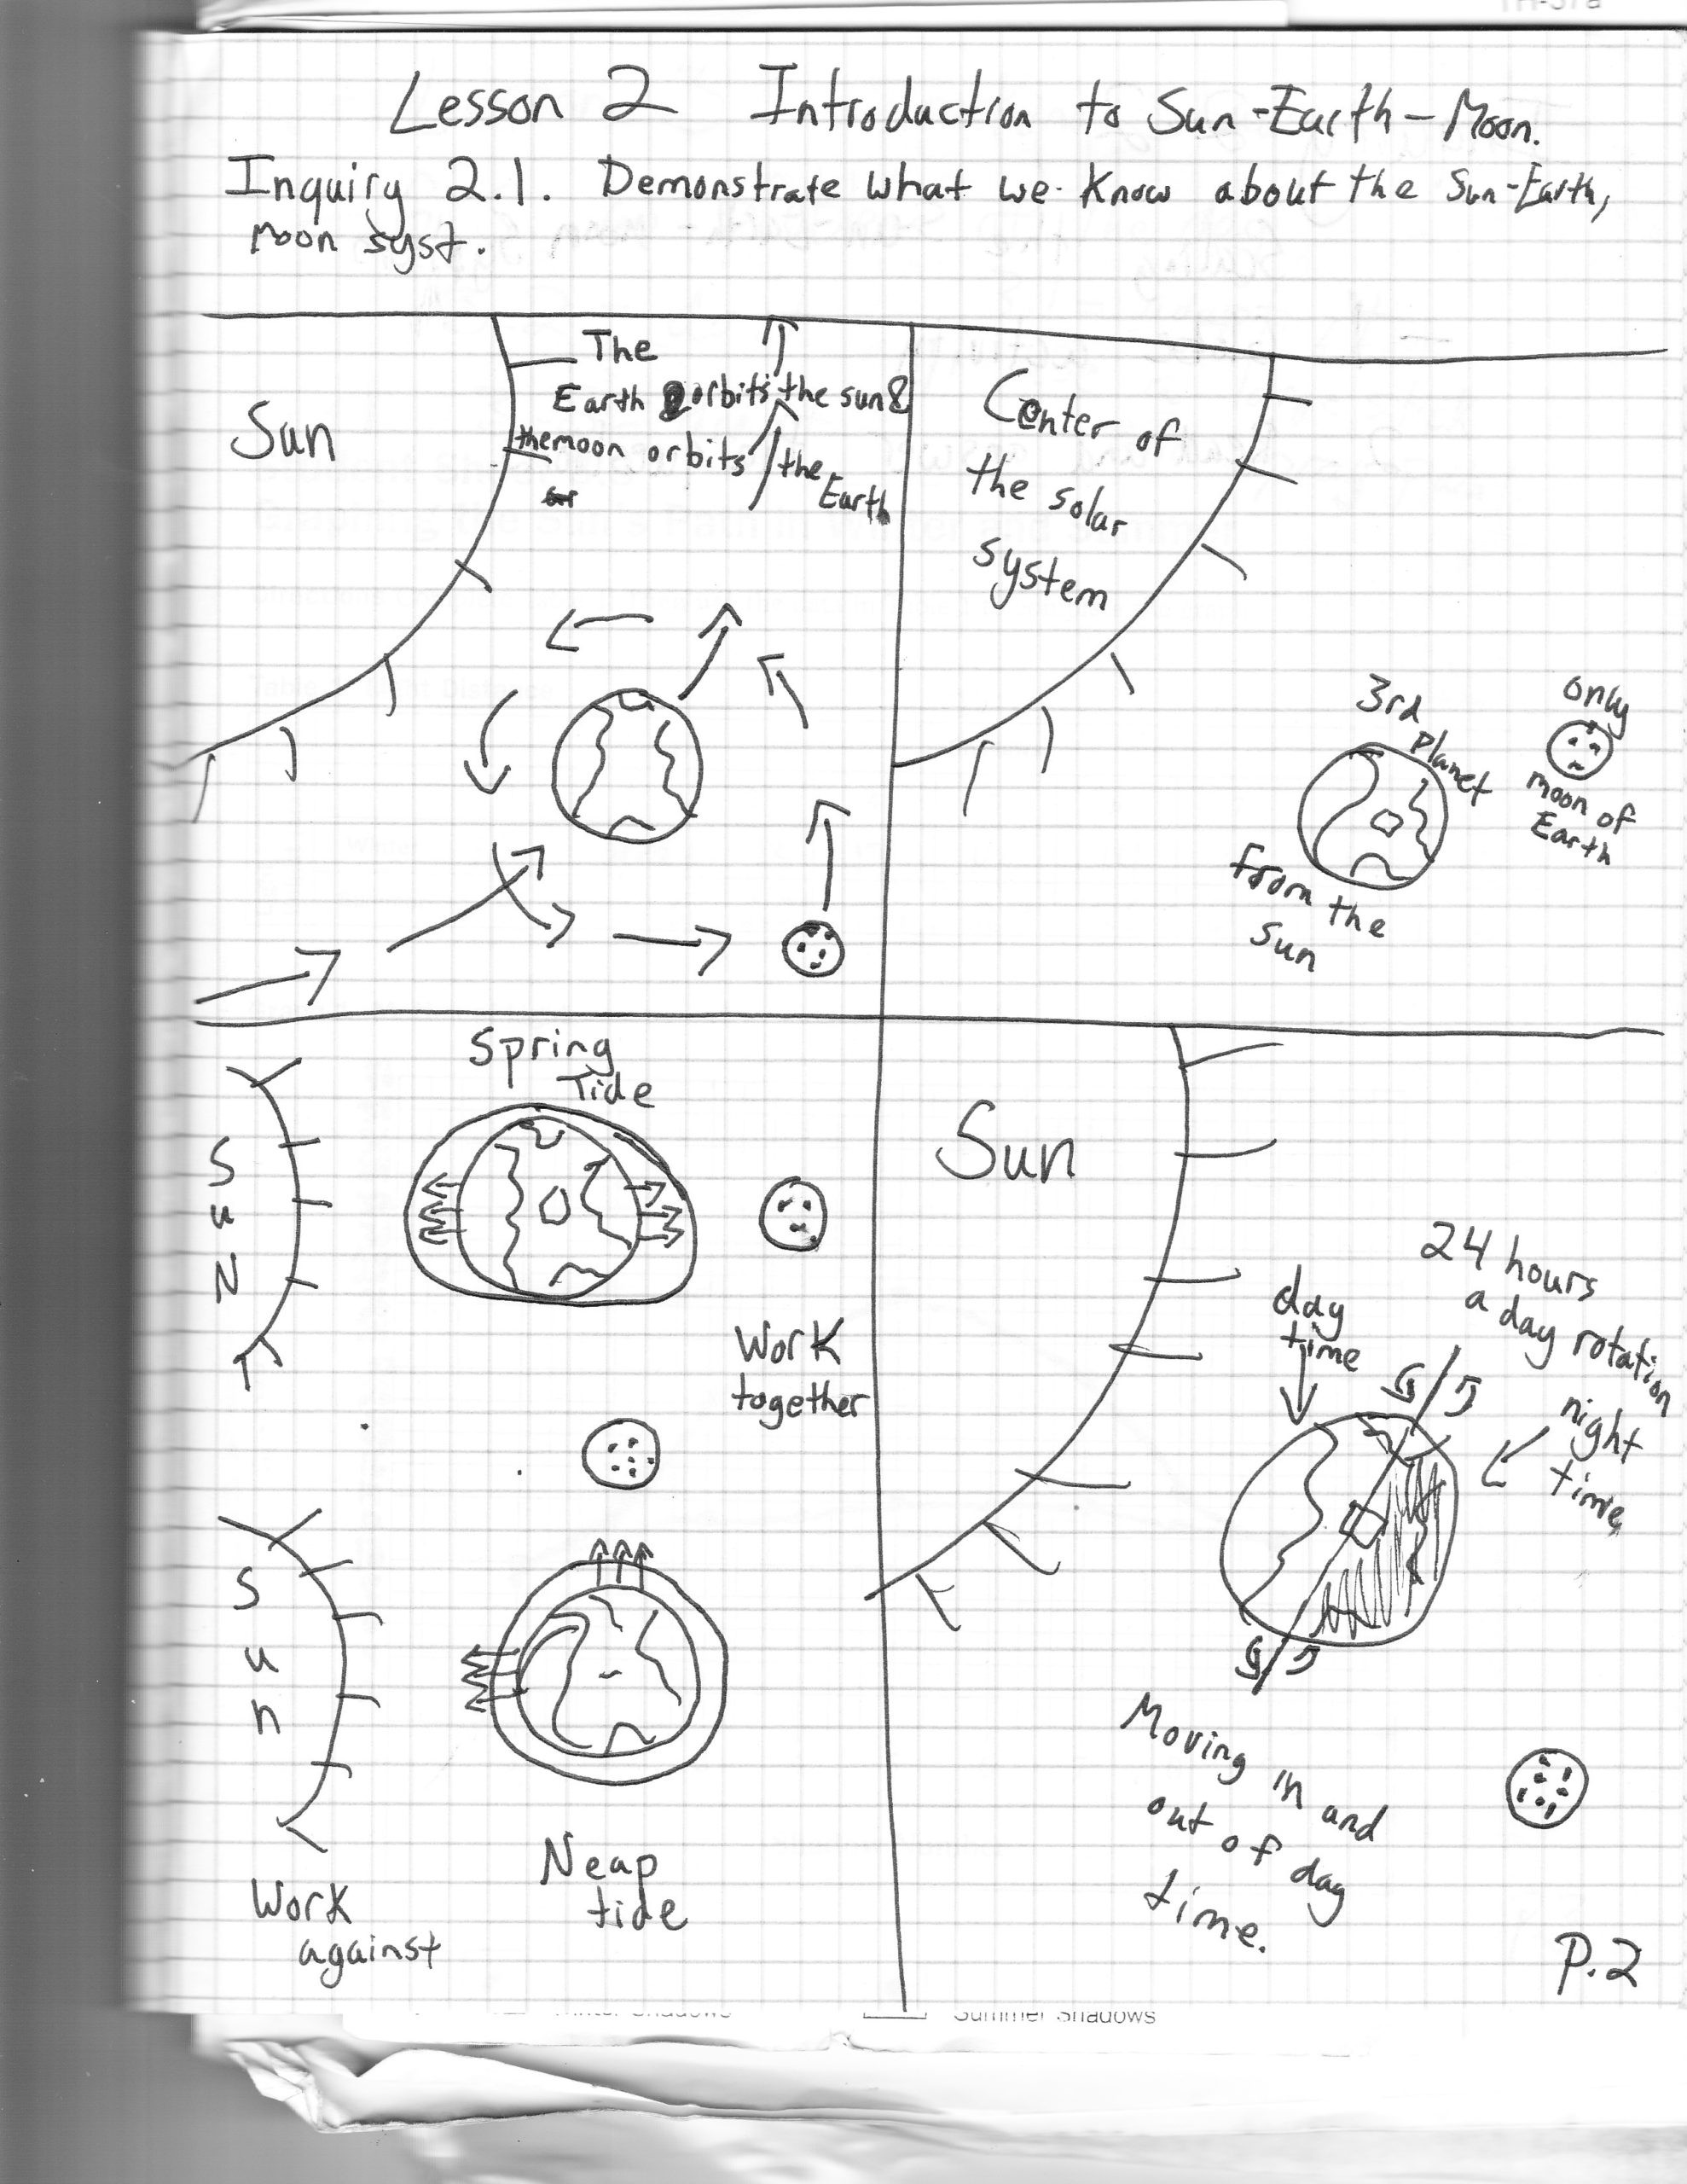 Moon Phases Worksheet Answers Moon Phases Worksheet Answers Printable Worksheets and High